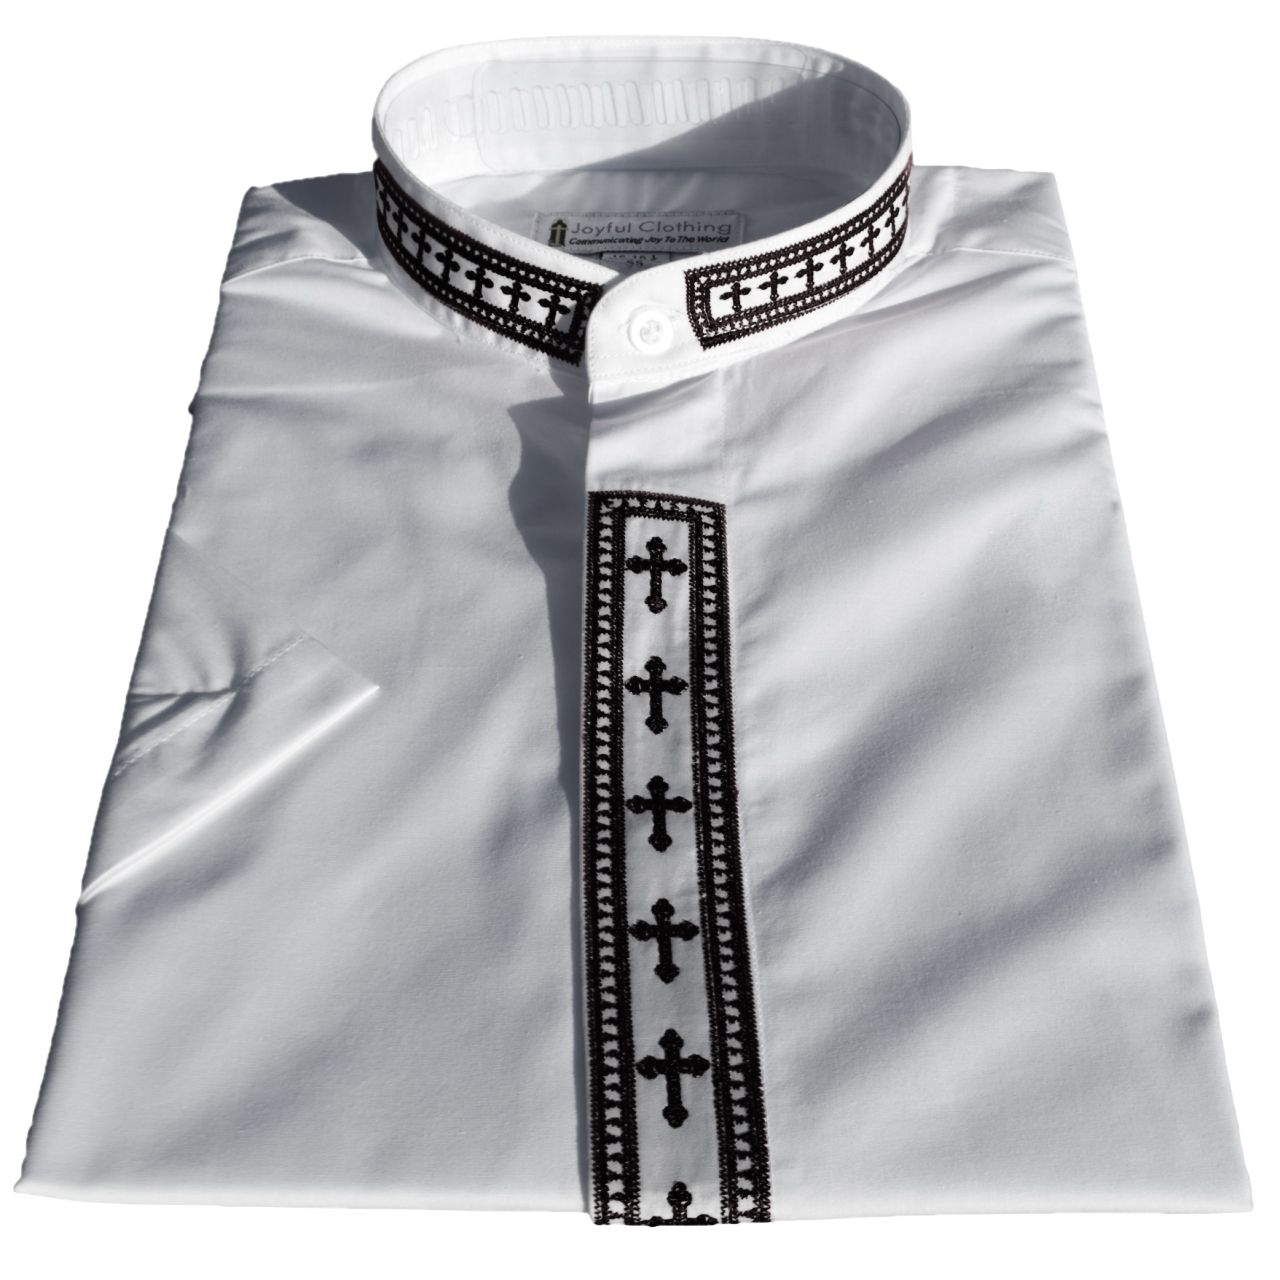 766. Women's Short-Sleeve Clergy Shirt With Fine Embroidery - White/Black